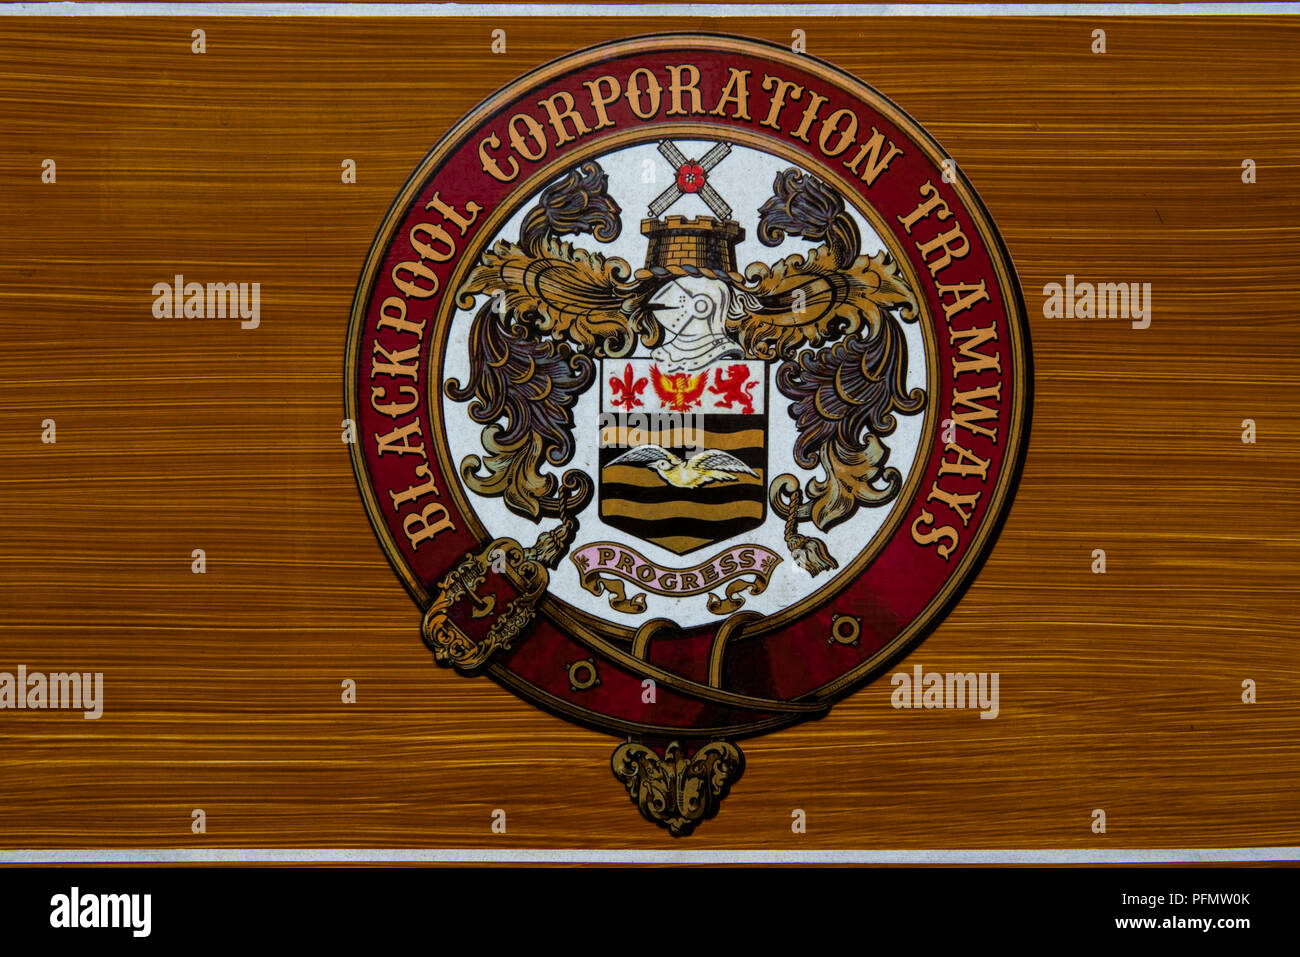 Coat of arms and logo for Blackpool Corporation Tramways panted on the side of Tram No 40 at Crich Tramway Village, Derbyshire 19/08/2018 Stock Photo